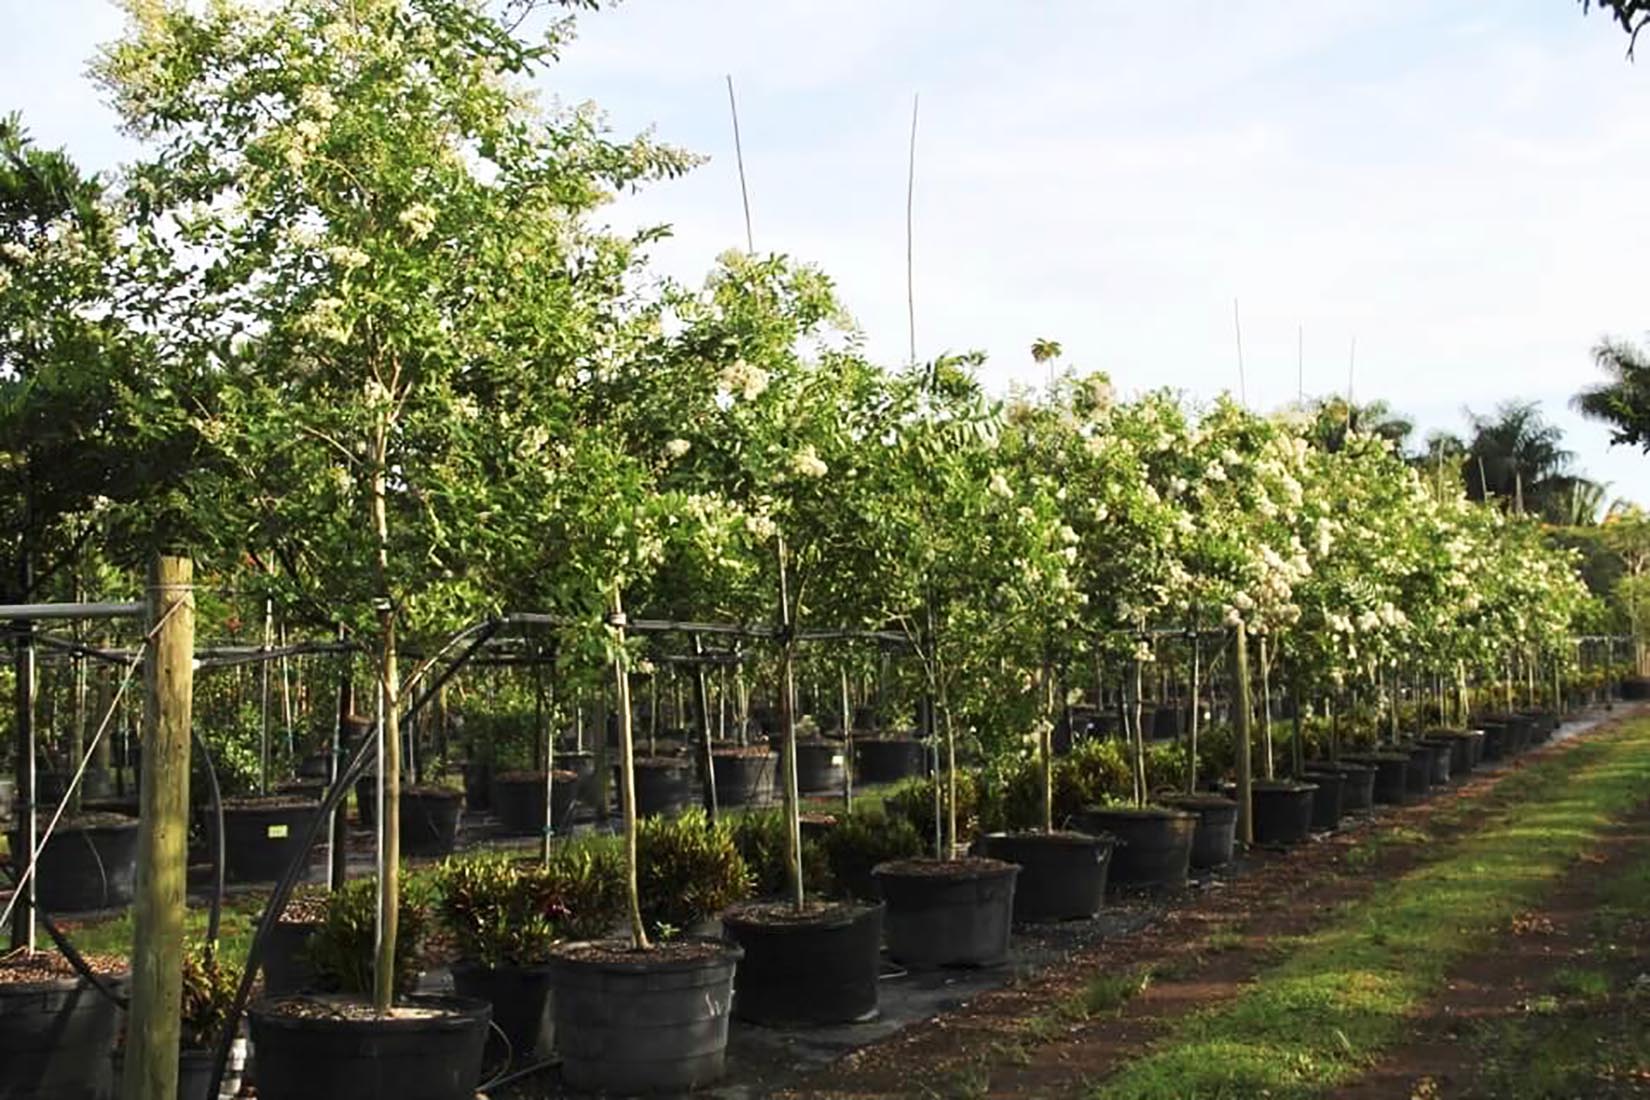 45 gal lagerstroemia indica at TreeWorld Wholesale